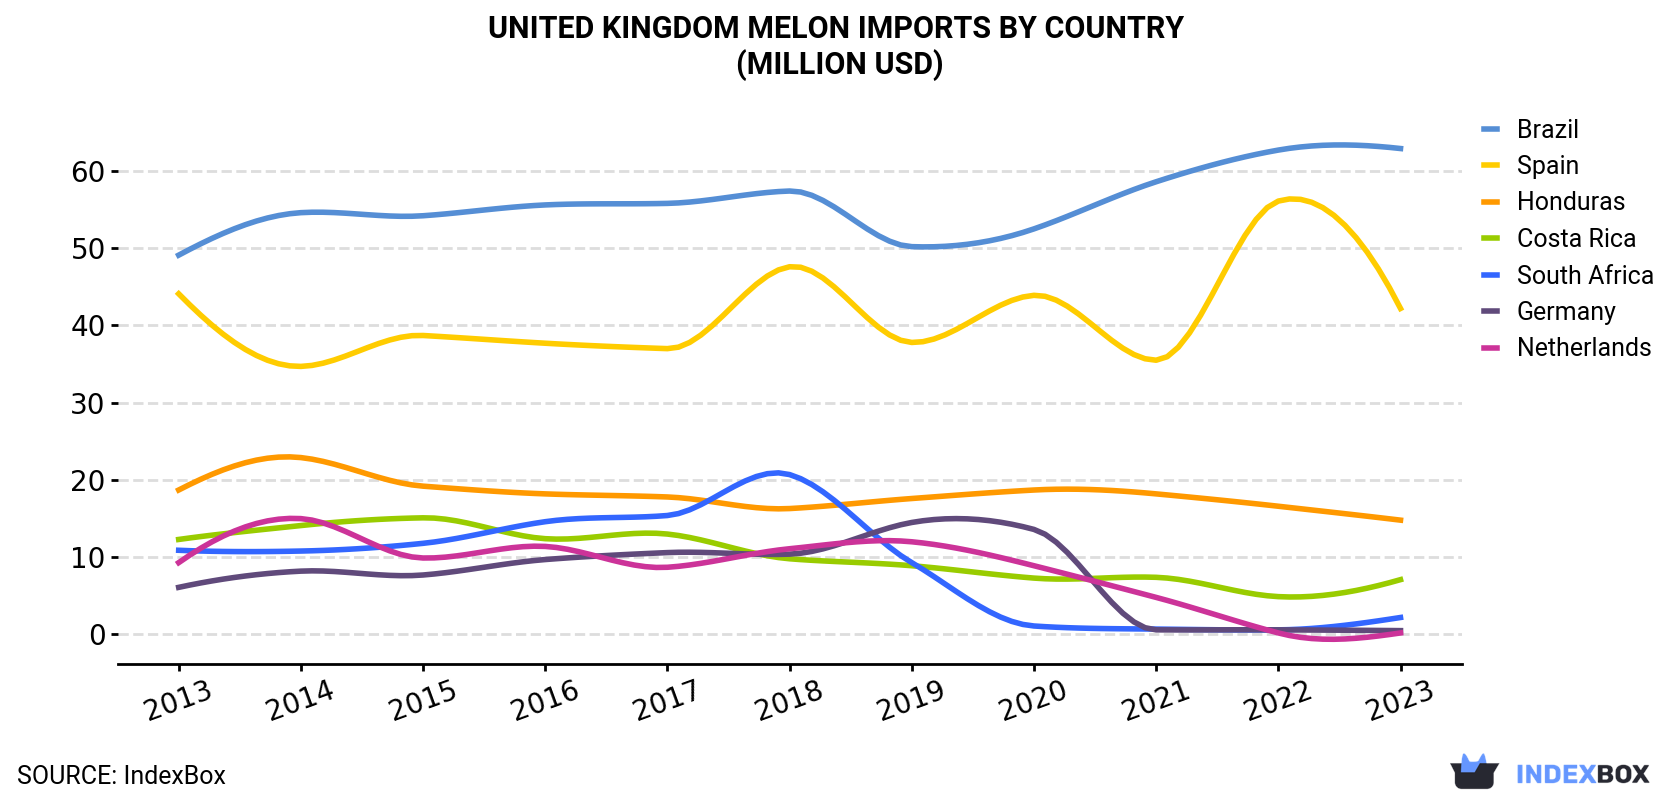 United Kingdom Melon Imports By Country (Million USD)